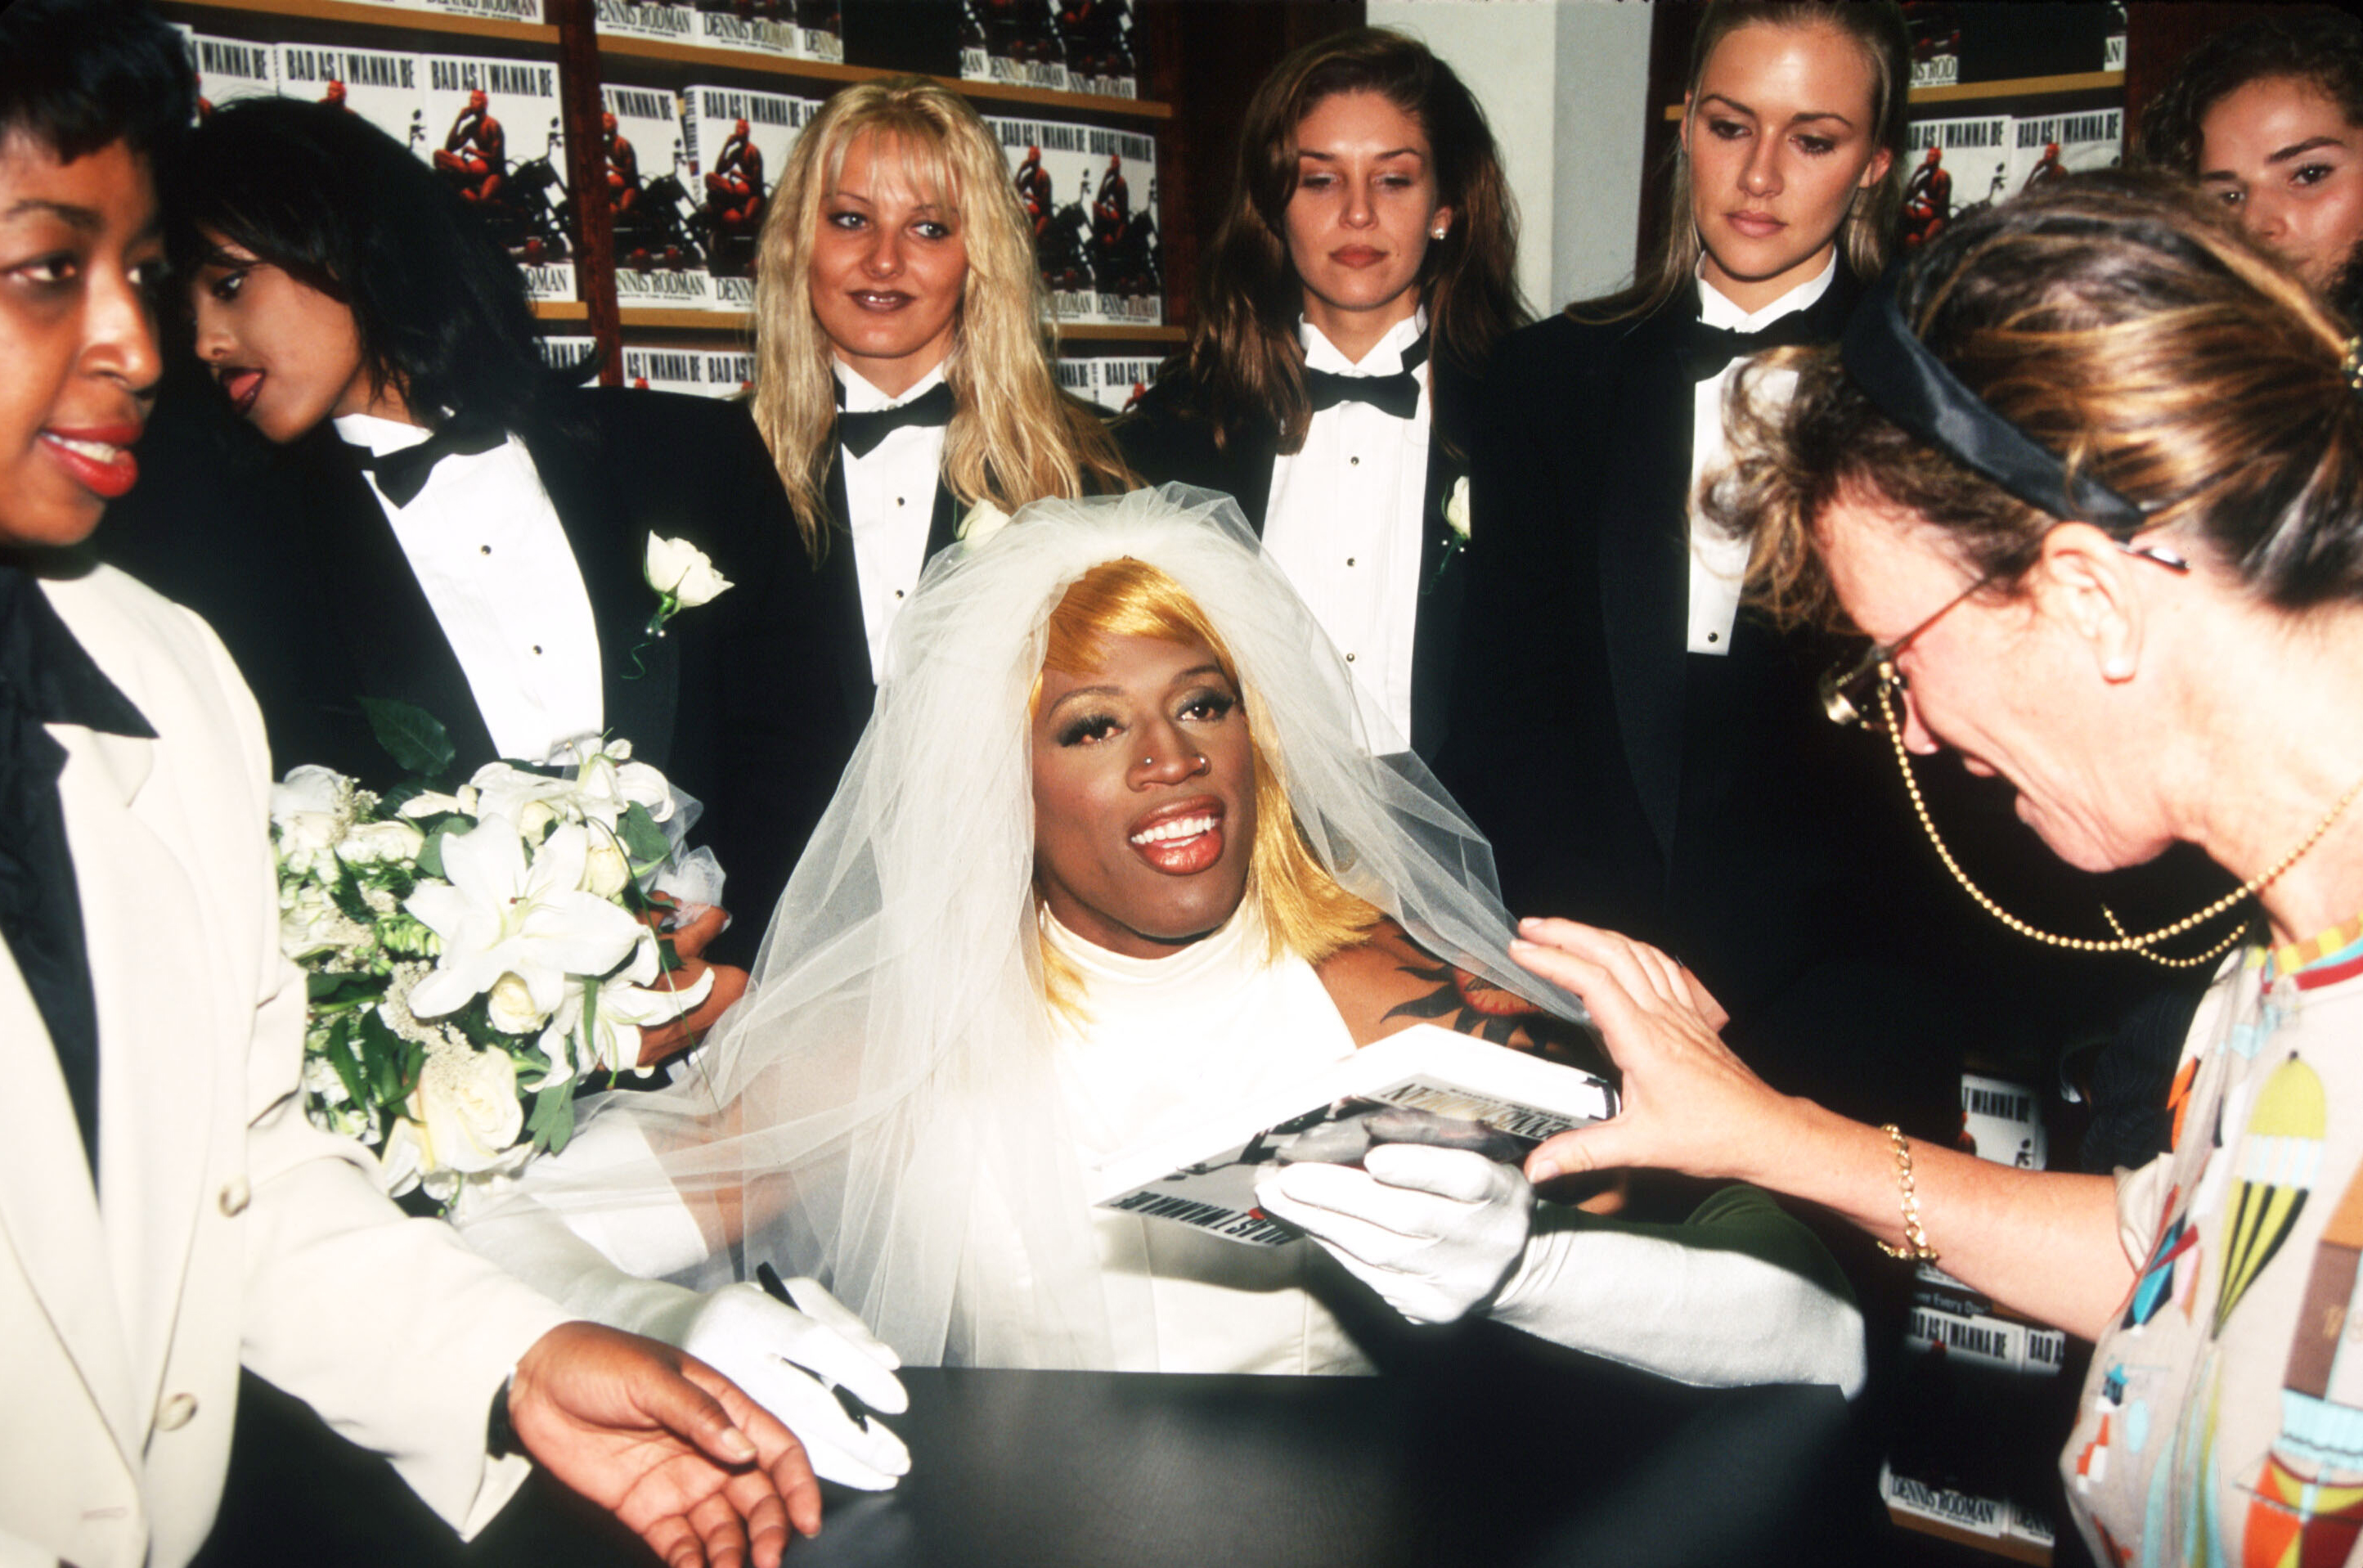 Remember when Dennis Rodman put on a wedding dress and claimed to marry him...